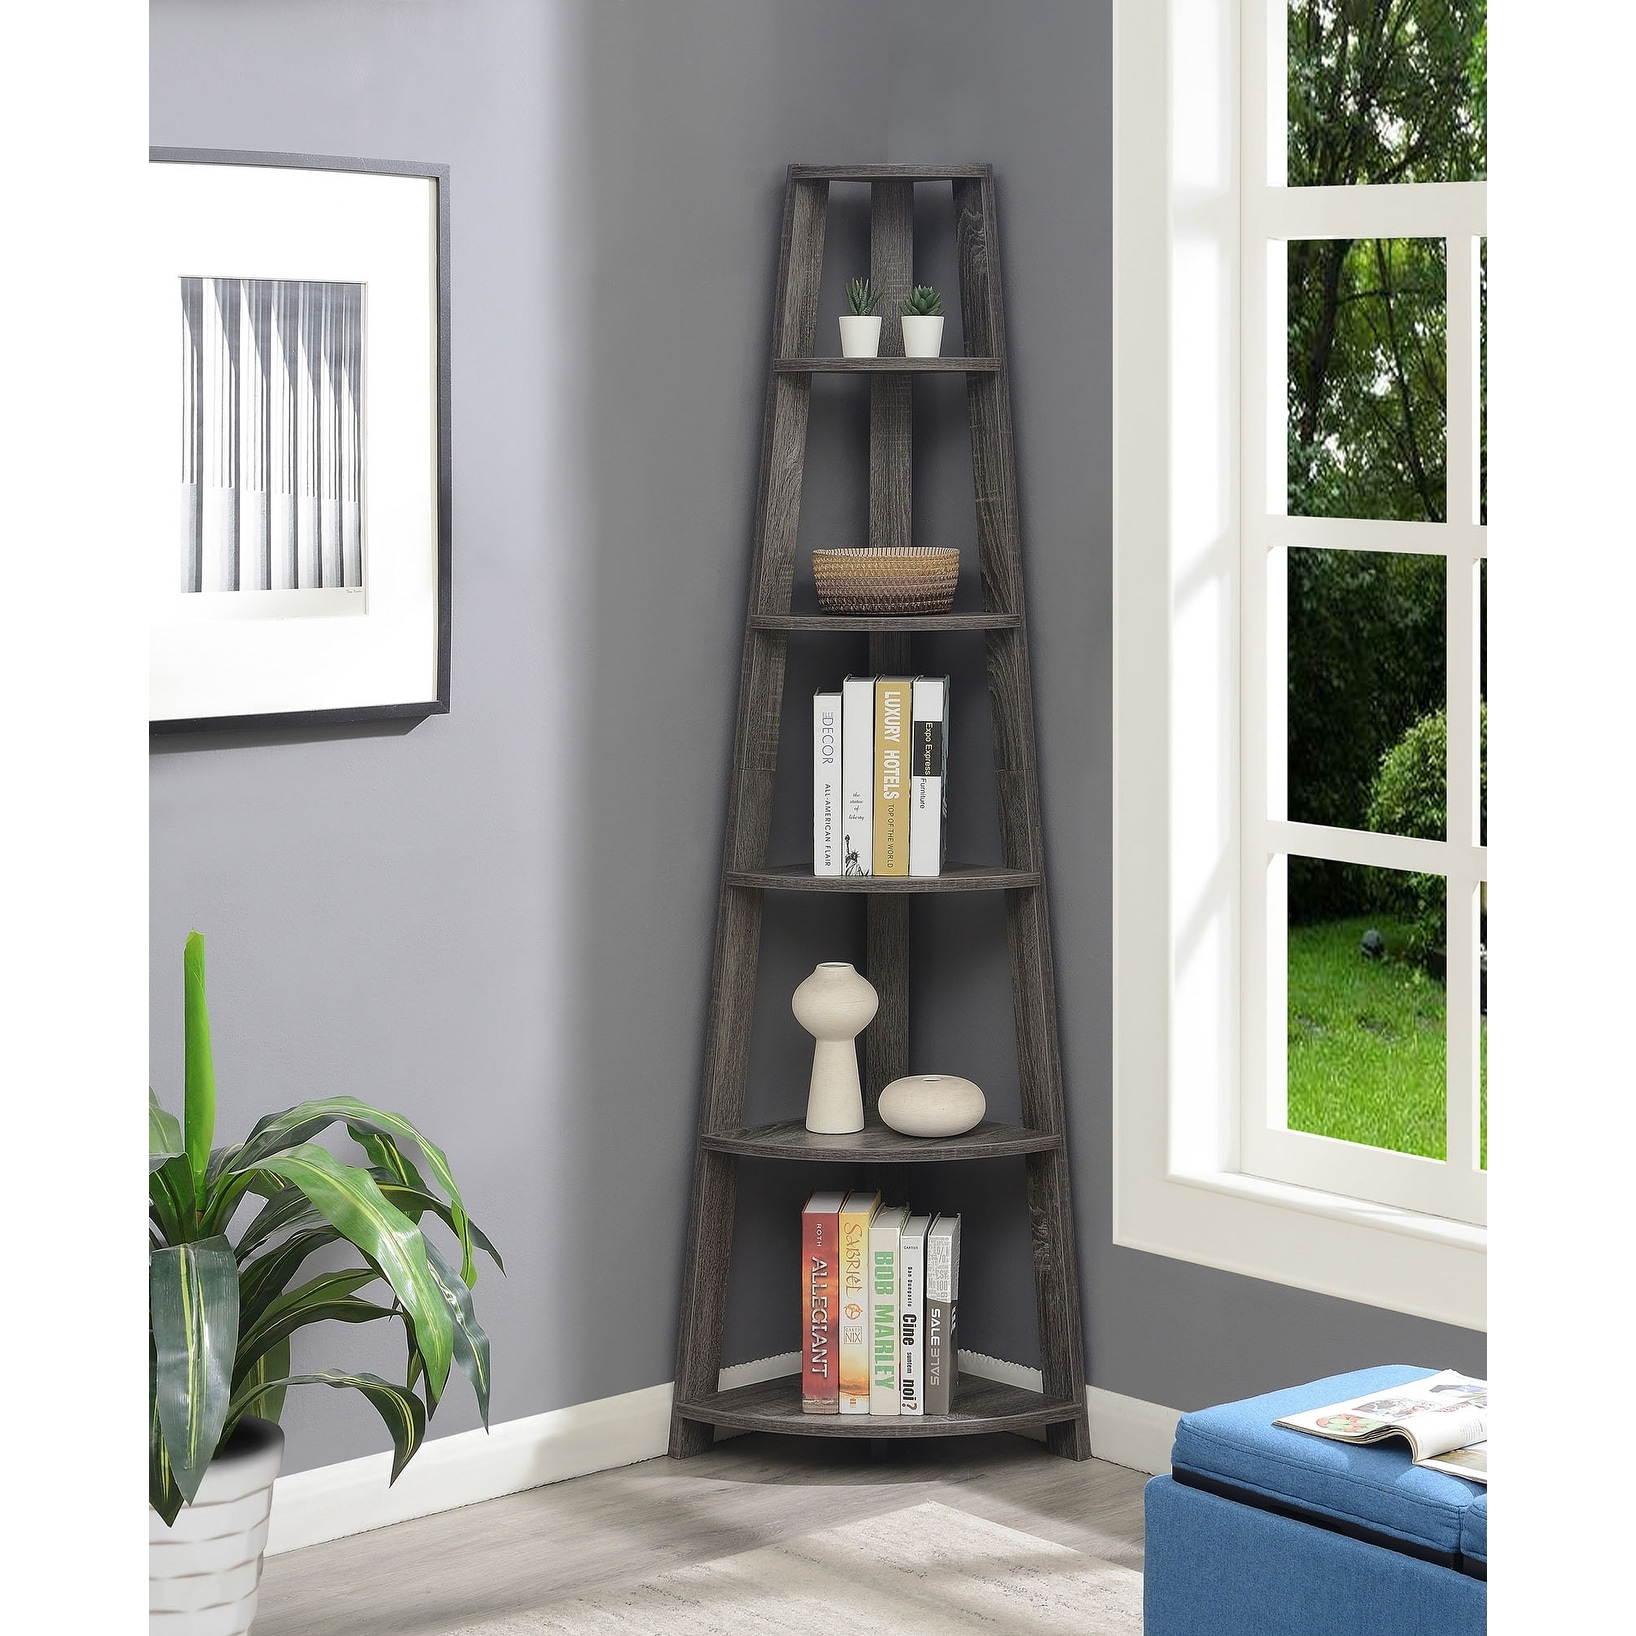 https://ak1.ostkcdn.com/images/products/is/images/direct/ee63cde476d1c7a06f66e7a1afed9c4ee342d9d7/Copper-Grove-5-Tier-Bookcase.jpg